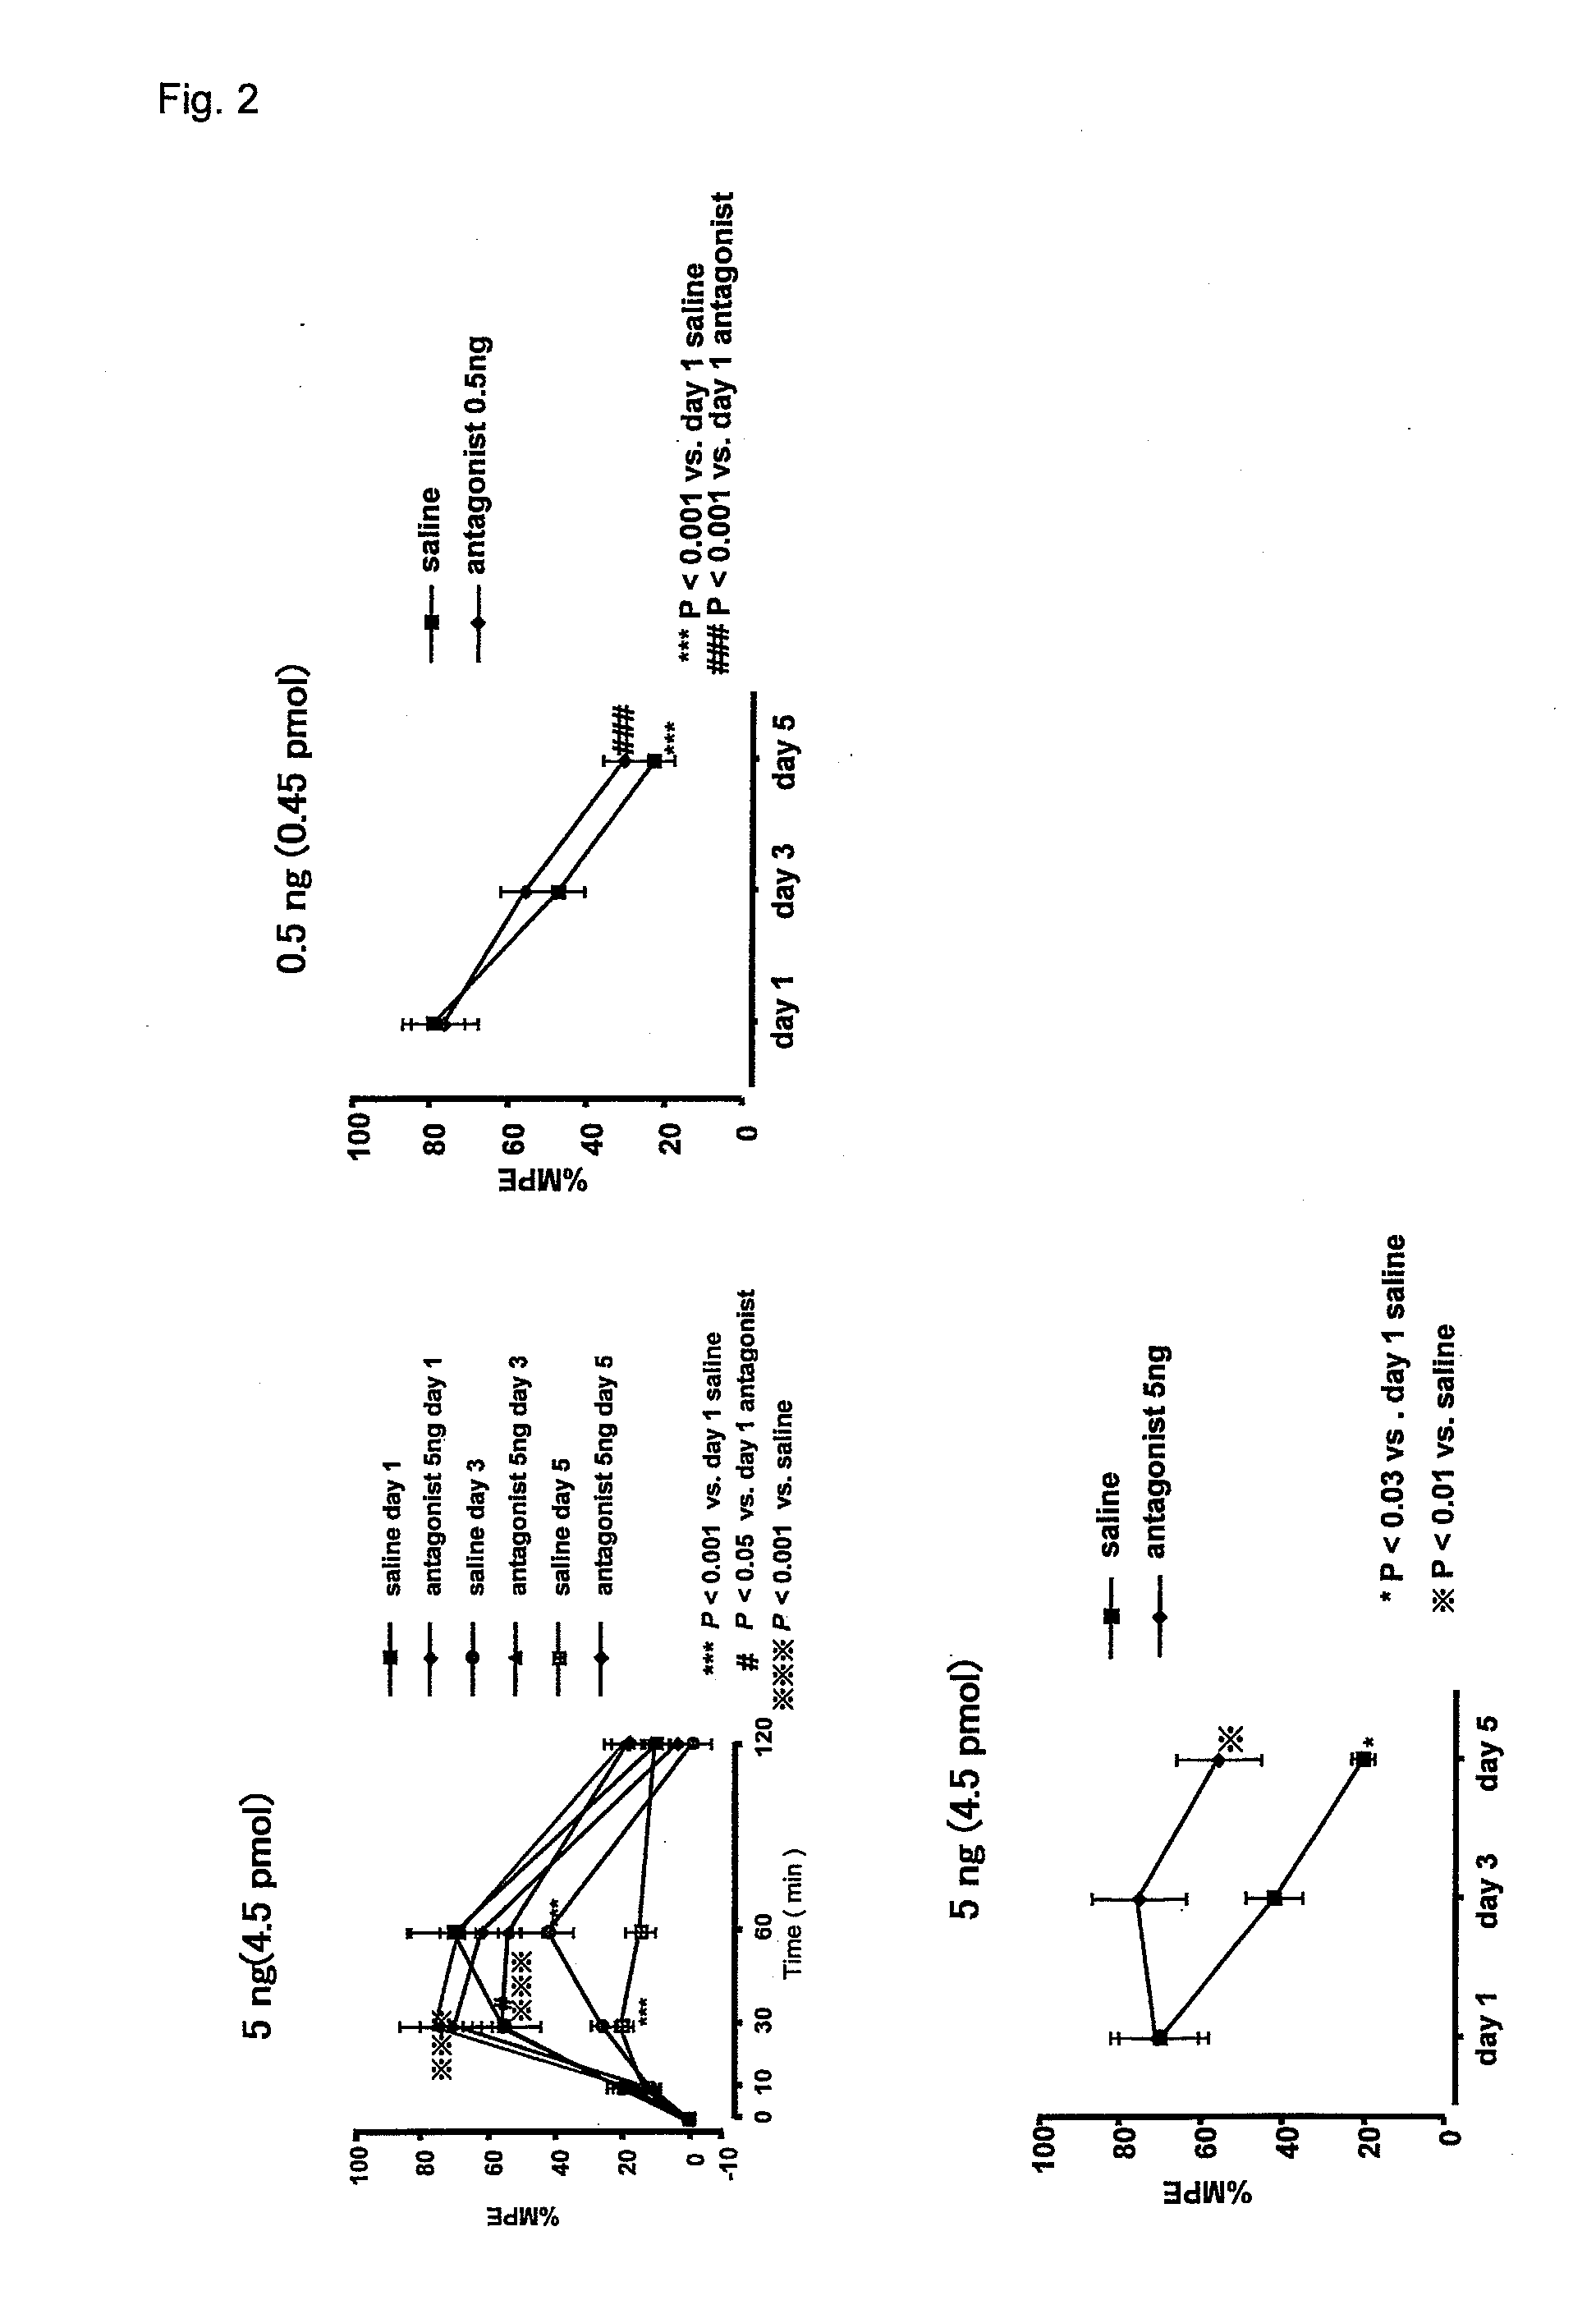 Agent For Suppressing Development of Tolerance to Narcotic Analgesics